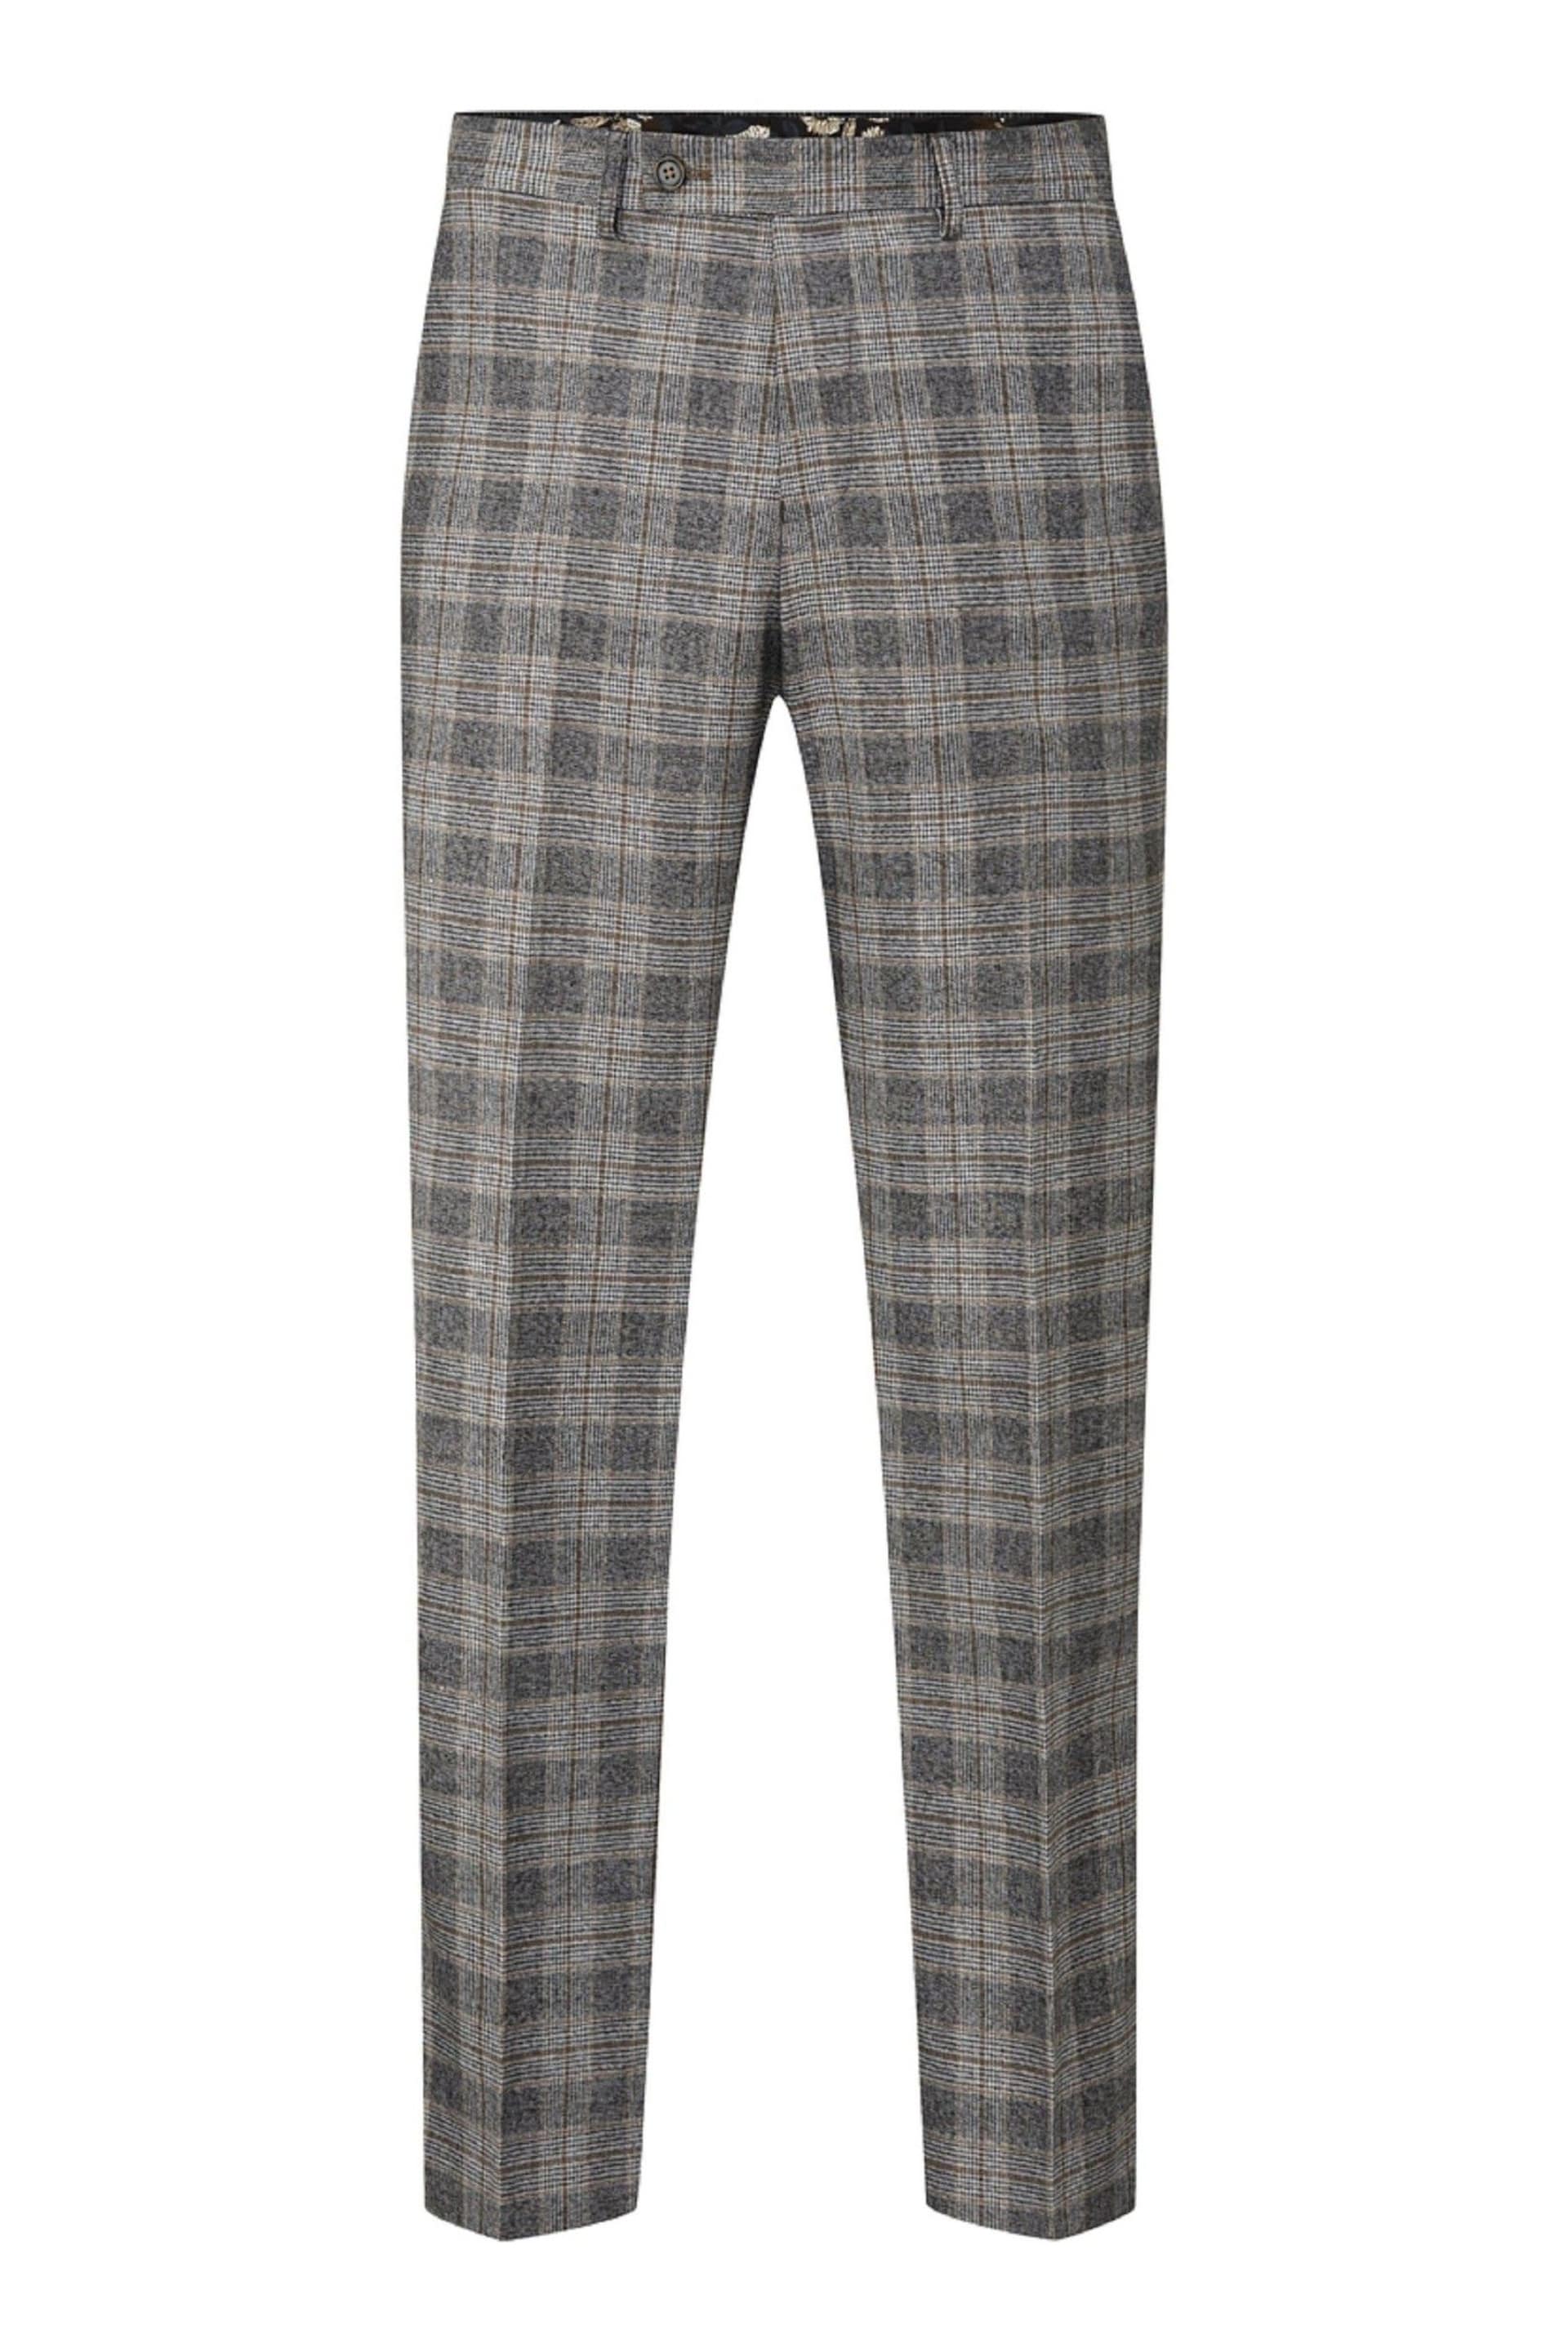 Skopes Tatton Grey Brown Check Tailored Fit Suit Trousers - Image 4 of 5